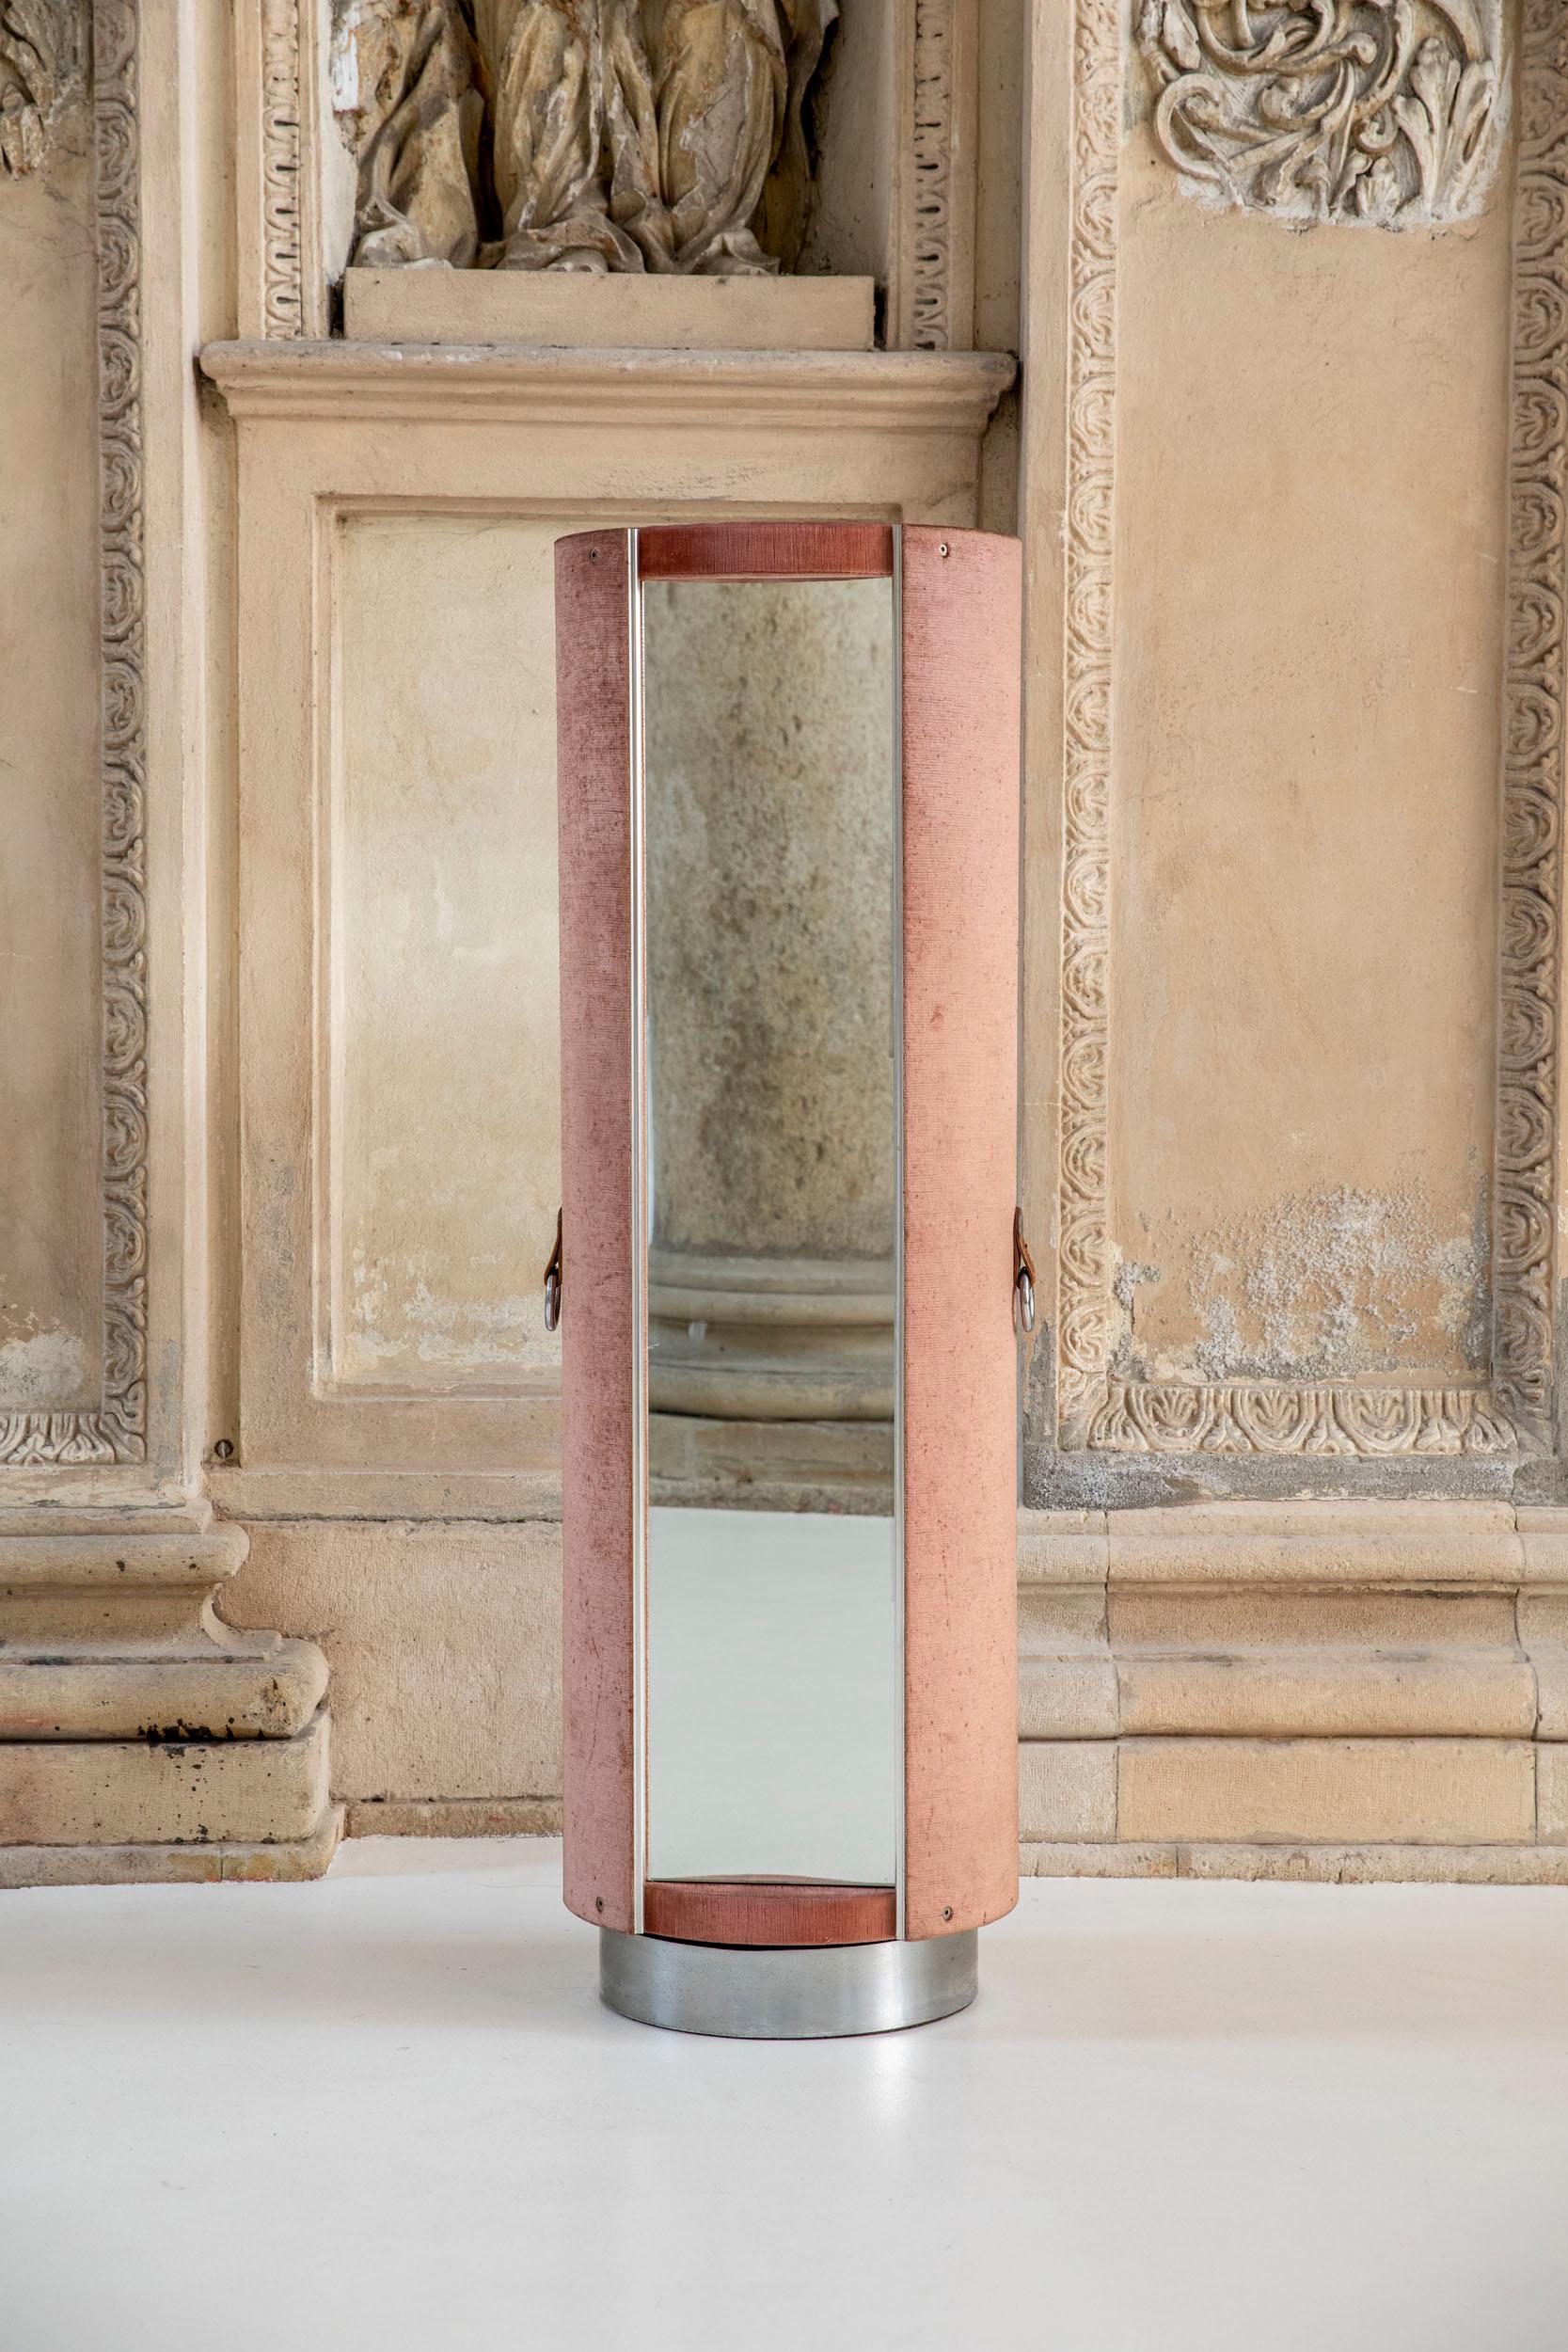 Rare mirrored rotating wardrobe by Guido Faleschini for Mariani, Italy 1970.
Original pink velvet, leather tabs and original full length mirror on a chrome base. 
Large compartment inside for old coats or dresses. 
 